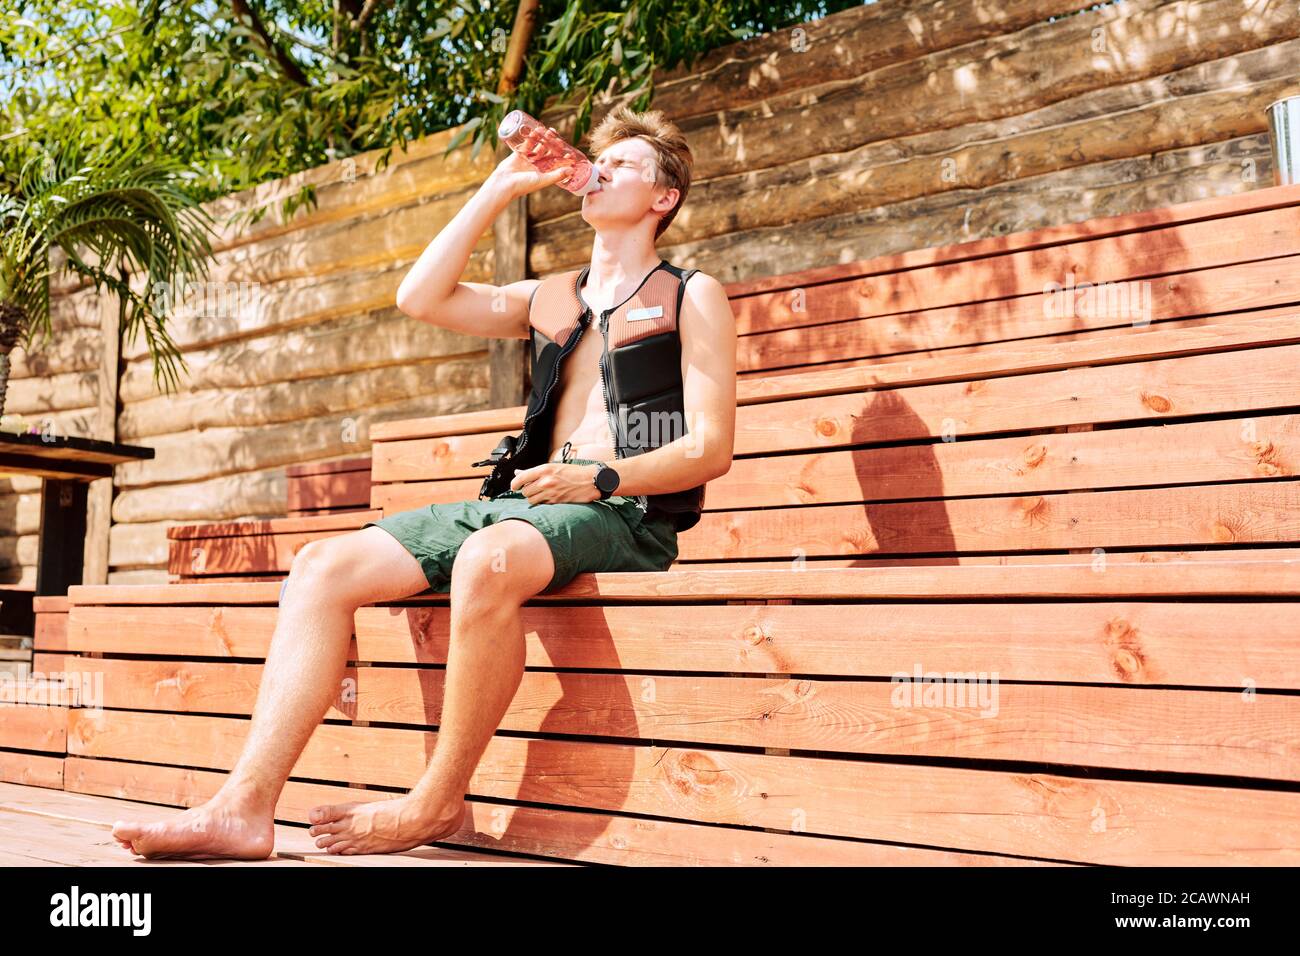 Young athlete in shorts and safety jacket sitting on wooden bench on sunny day Stock Photo